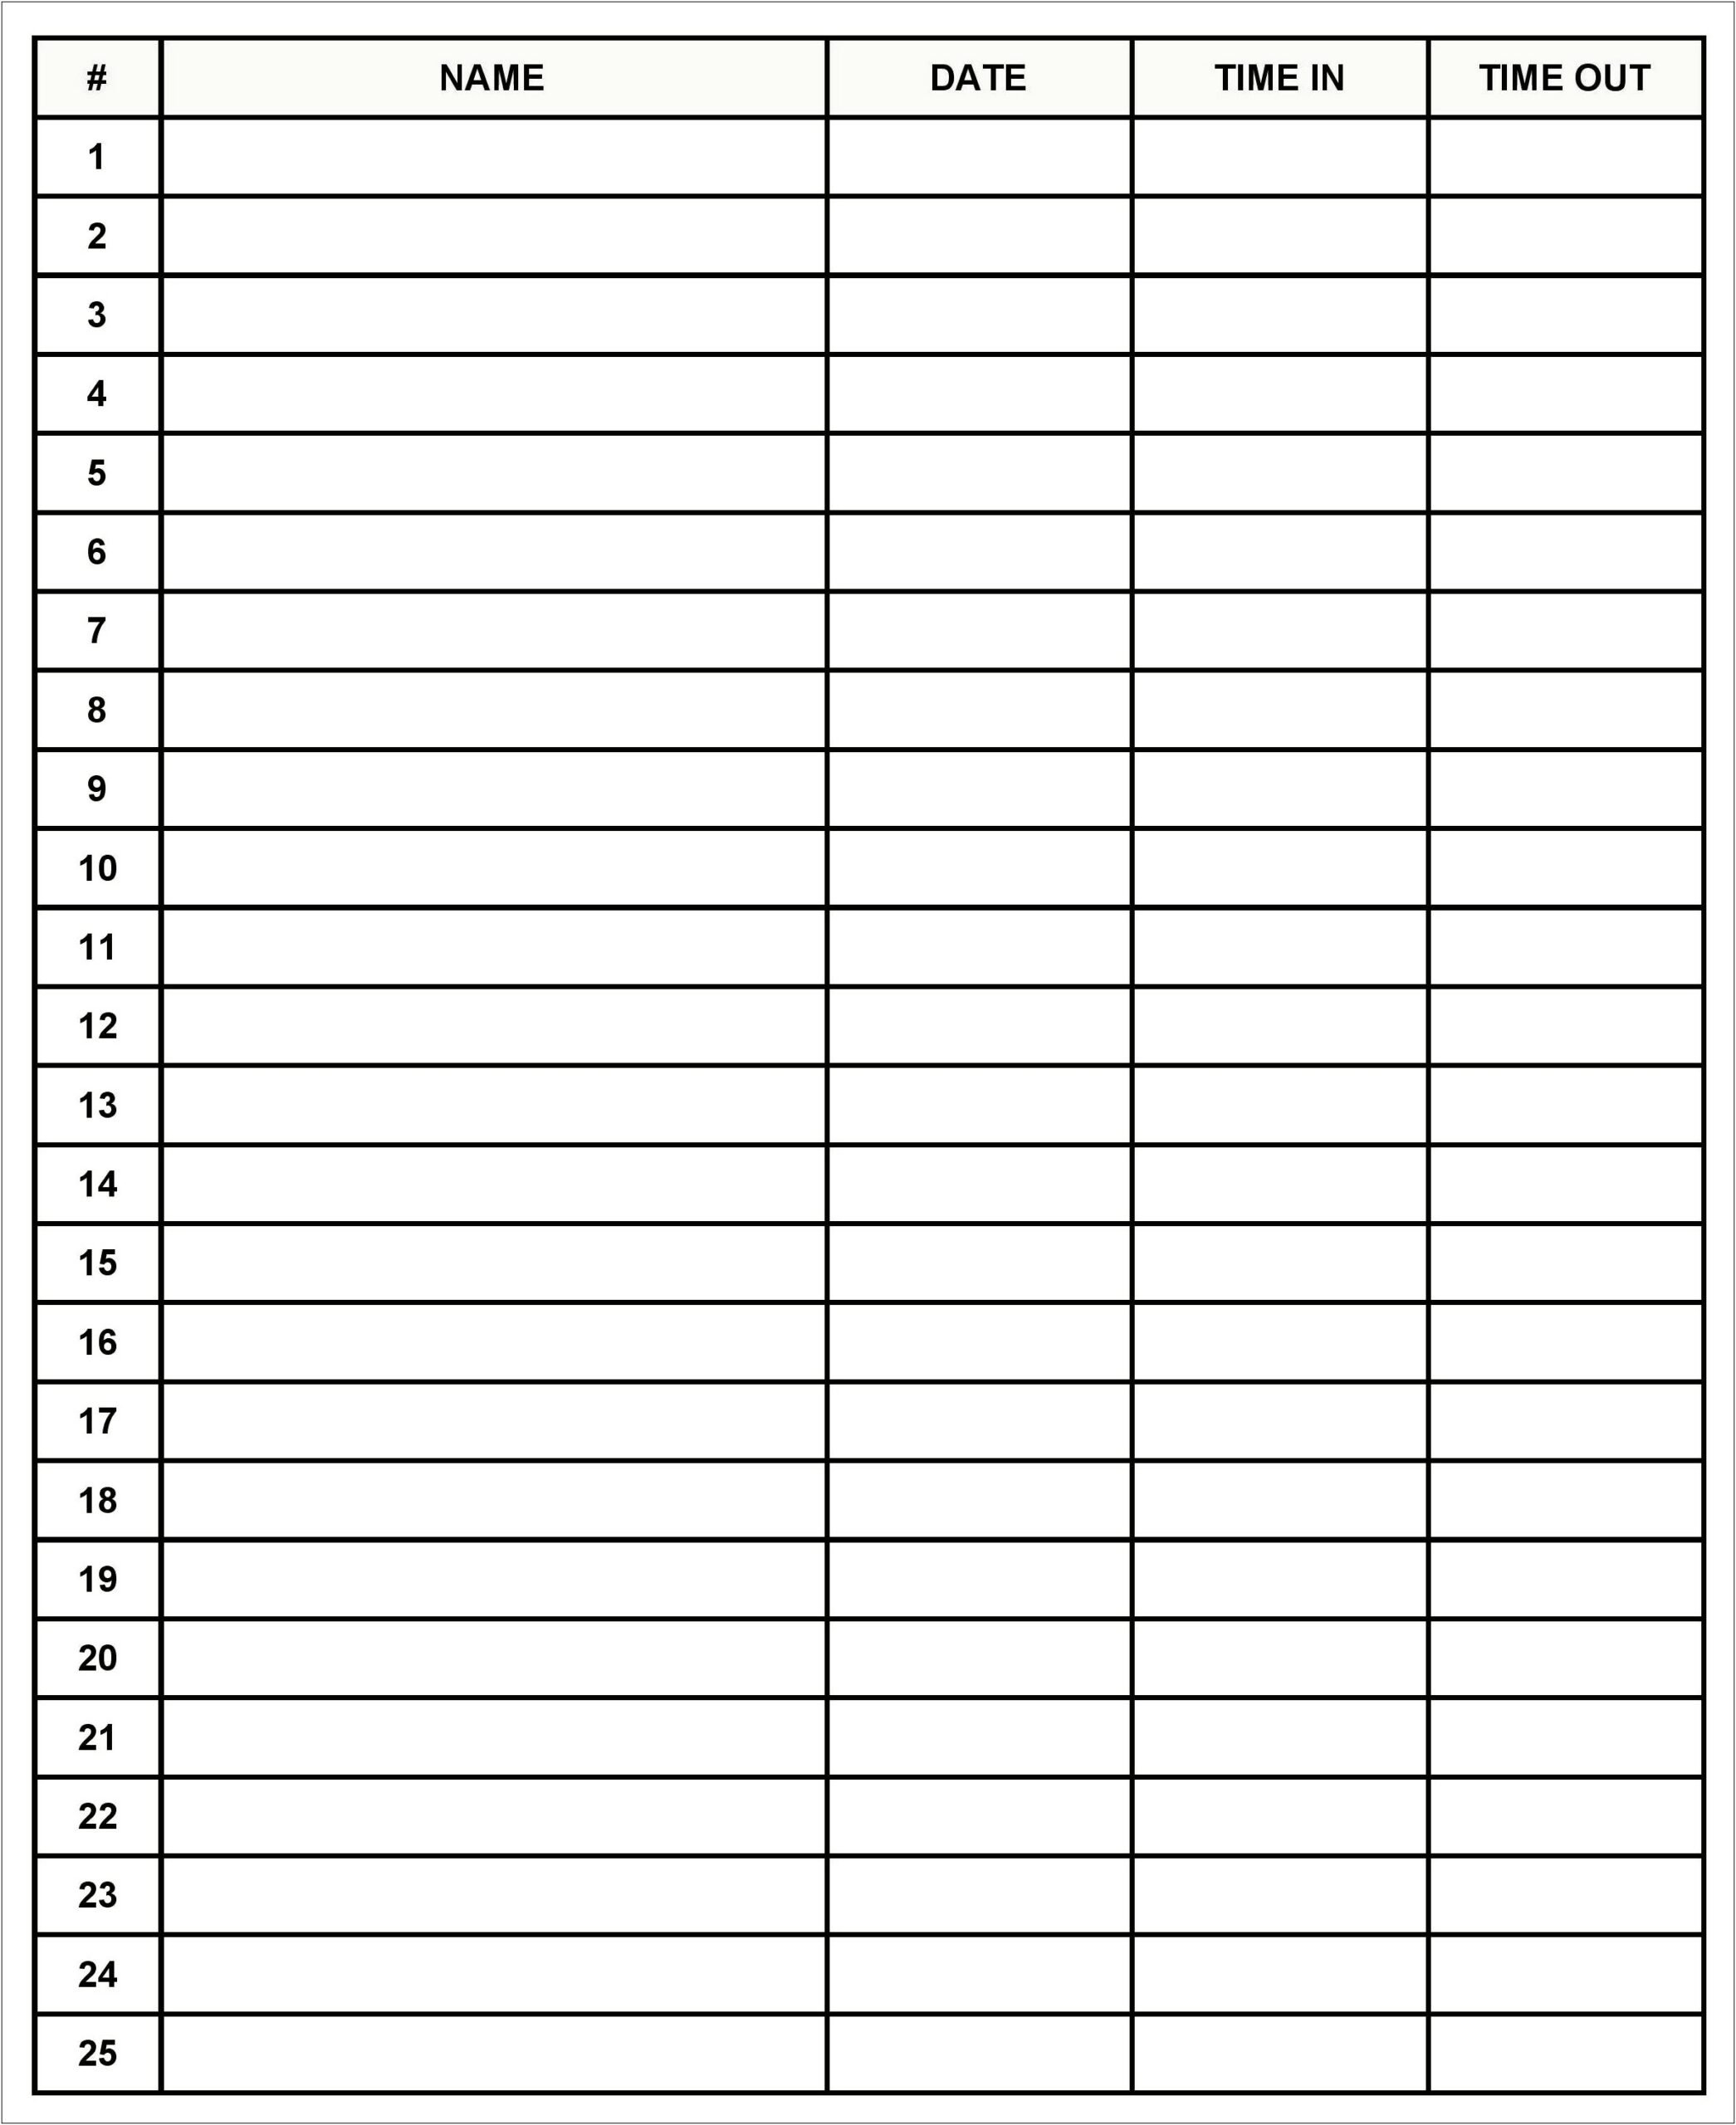 Dhs Visitor Log Book Template Download